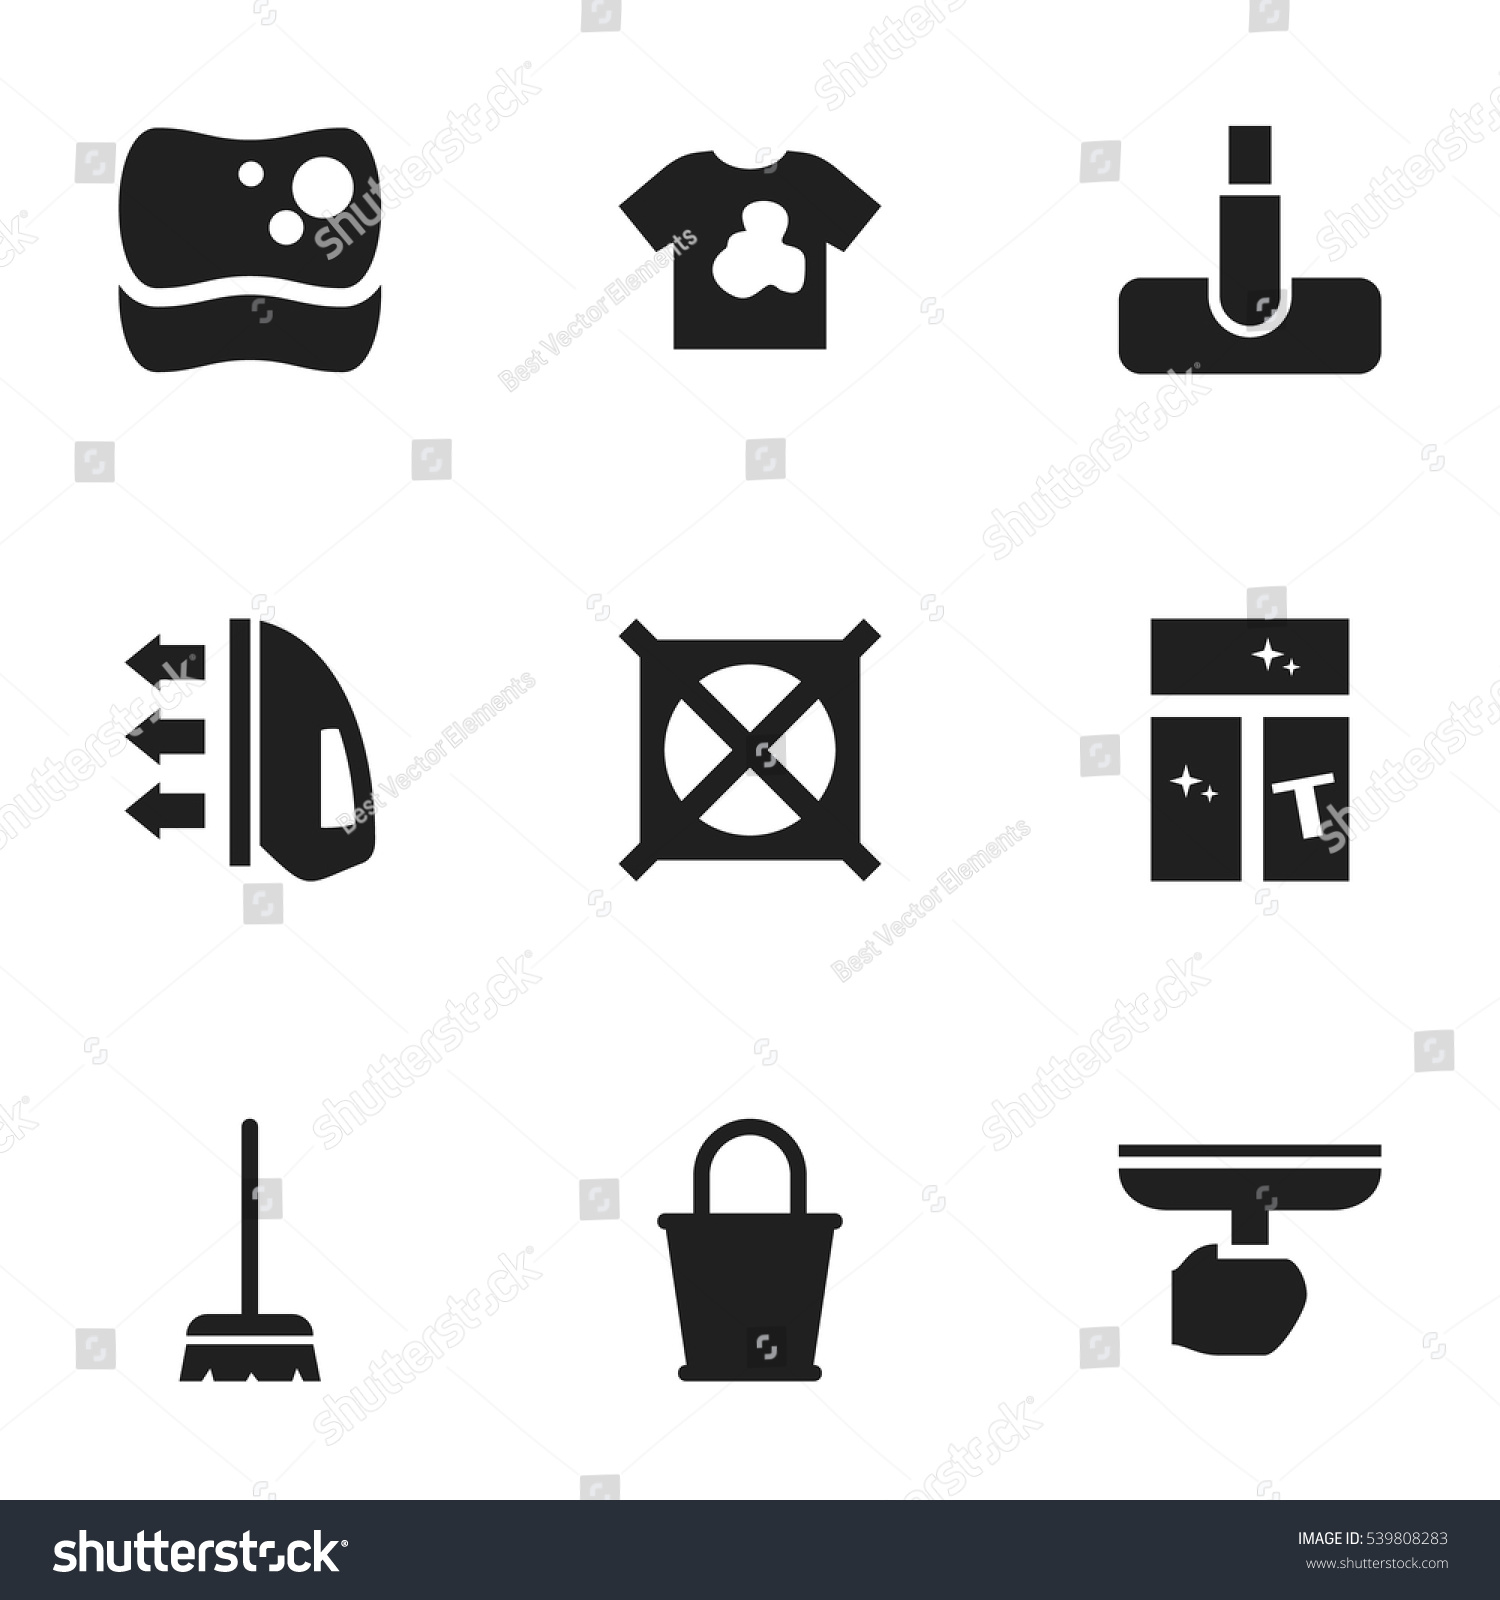 Set 9 Editable Cleaning Icons Includes Stock Vector 539808283 Shutterstock 